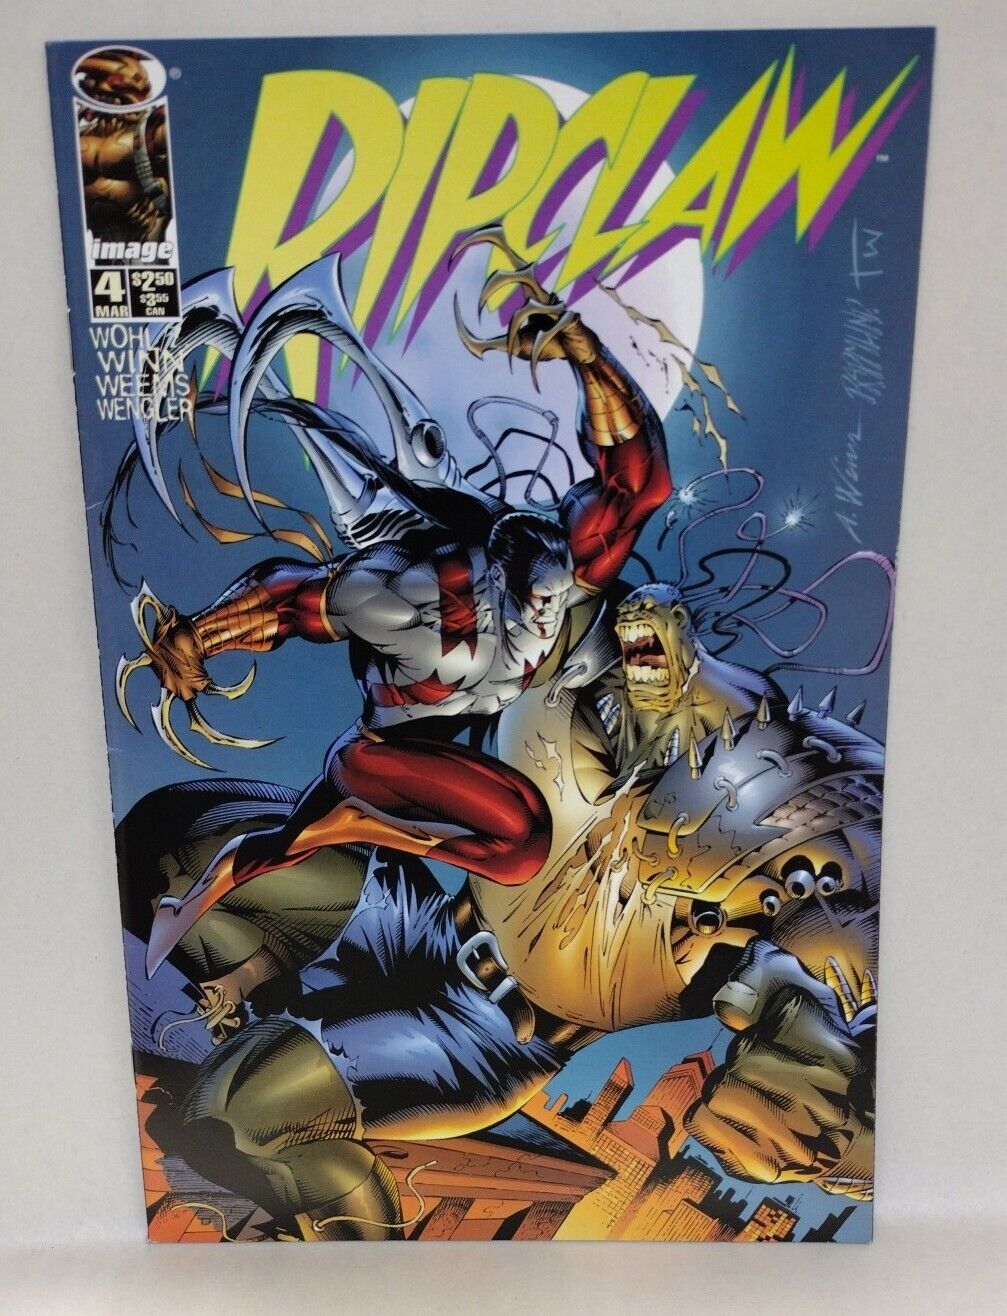 Ripclaw (1995) Image Top Cow Comic Lot Set 1 2 3 Special 1 Ongoing 1 3 4 5 6 